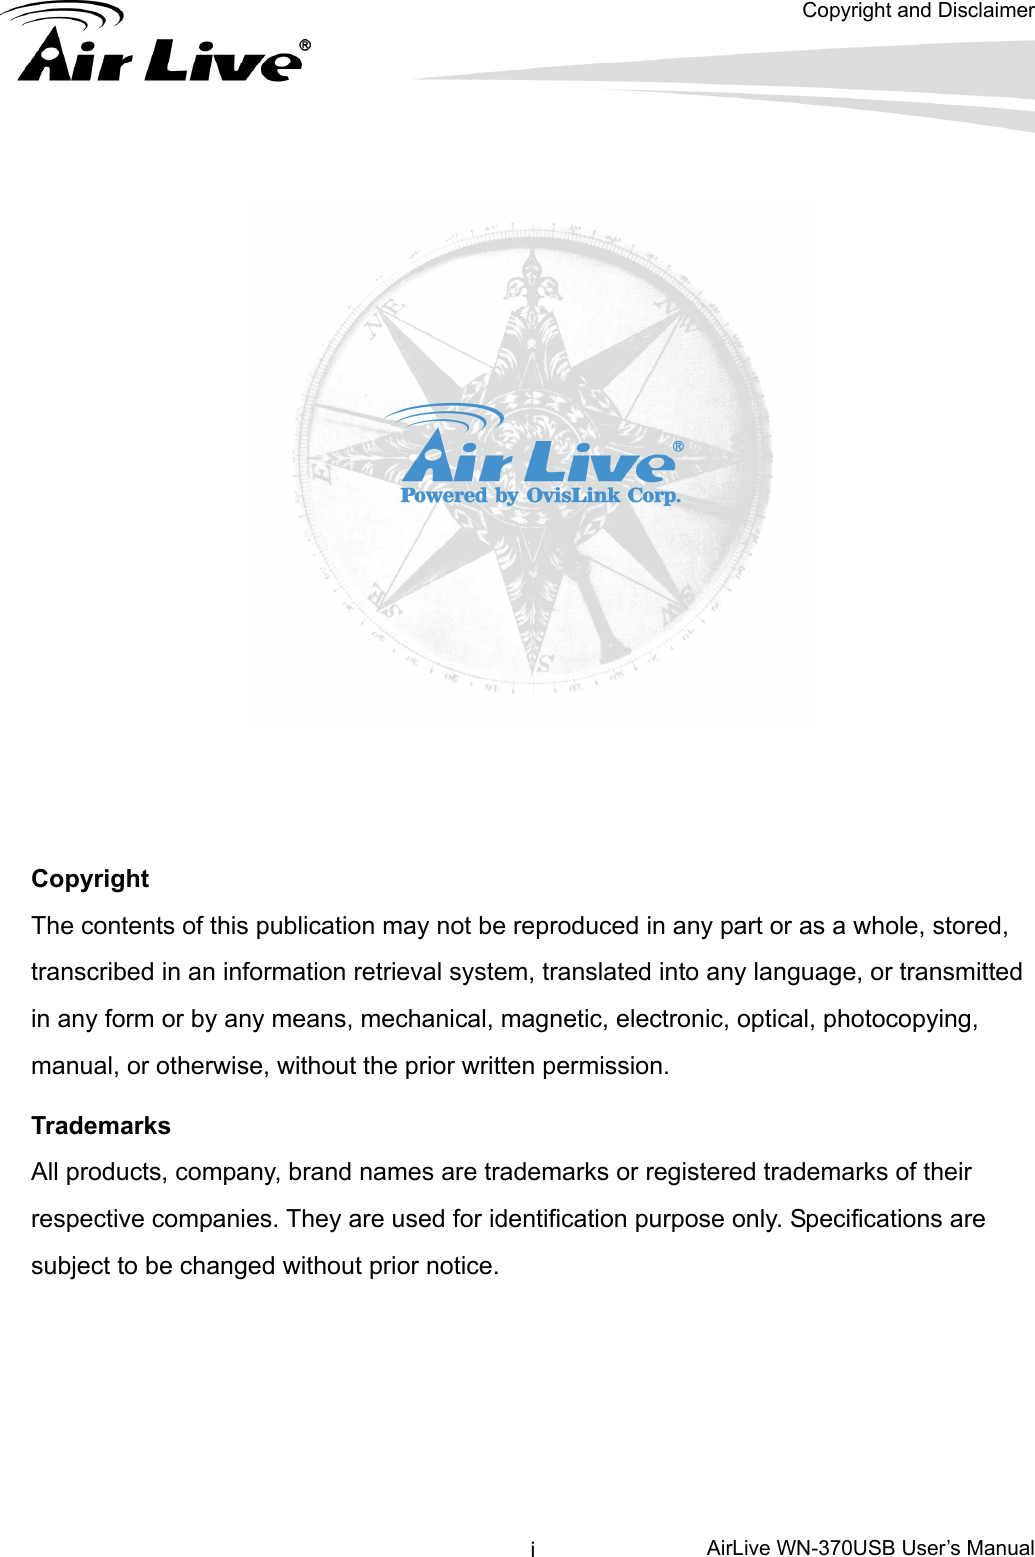  Copyright and Disclaimer      AirLive WN-370USB User’s Manual i     Copyright The contents of this publication may not be reproduced in any part or as a whole, stored, transcribed in an information retrieval system, translated into any language, or transmitted in any form or by any means, mechanical, magnetic, electronic, optical, photocopying, manual, or otherwise, without the prior written permission. Trademarks All products, company, brand names are trademarks or registered trademarks of their respective companies. They are used for identification purpose only. Specifications are subject to be changed without prior notice.      